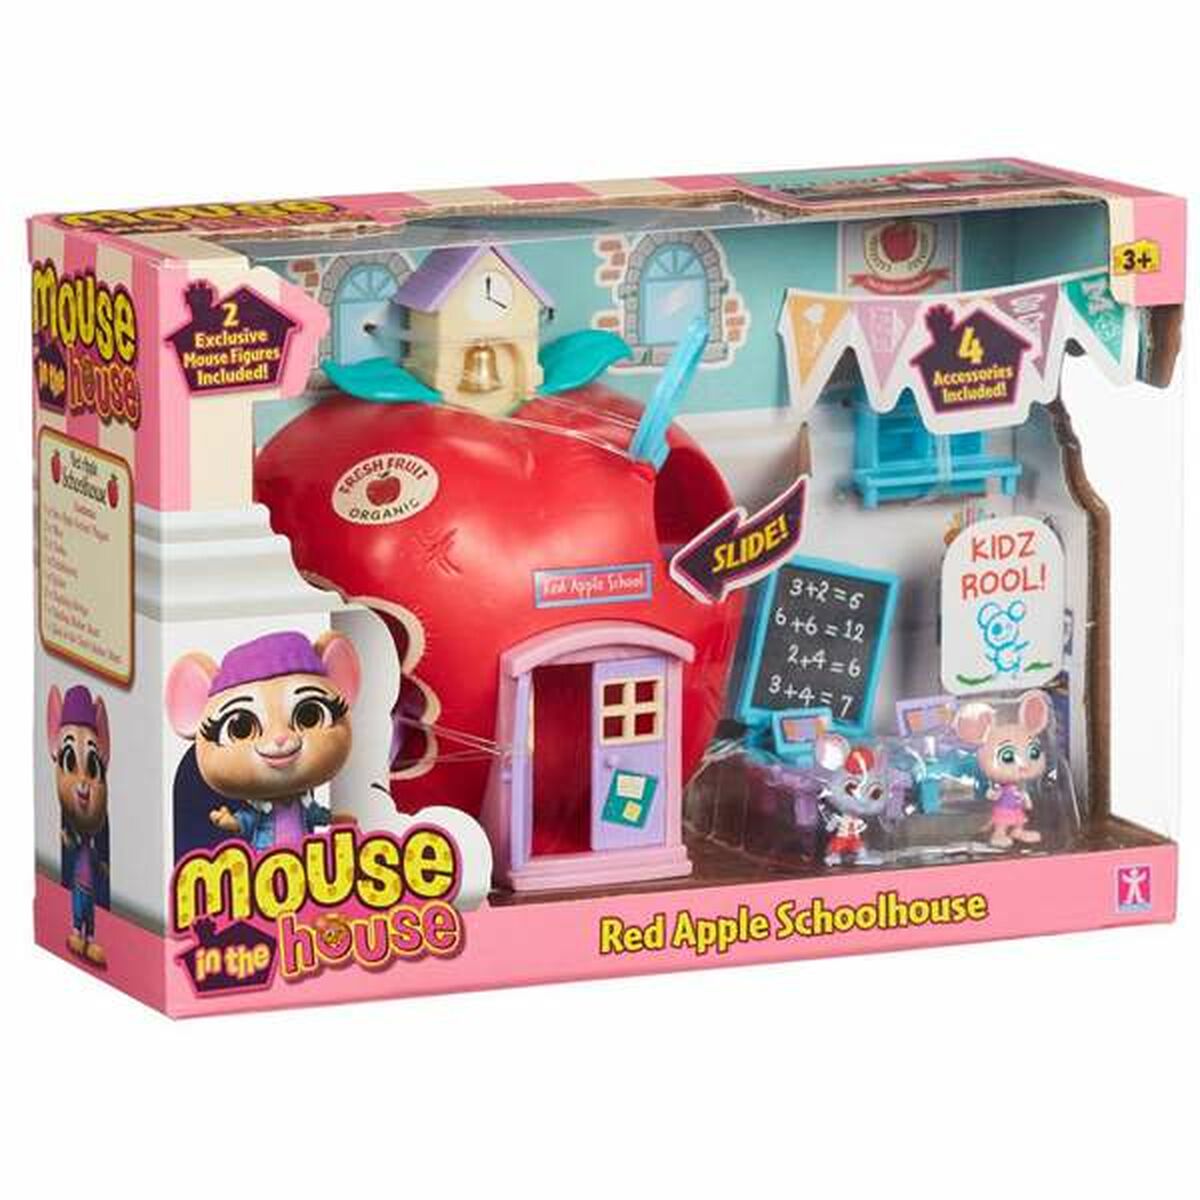 Bandai Mouse In The House Red Apple Schoolhouse 24 x 16,5 x 8 cm